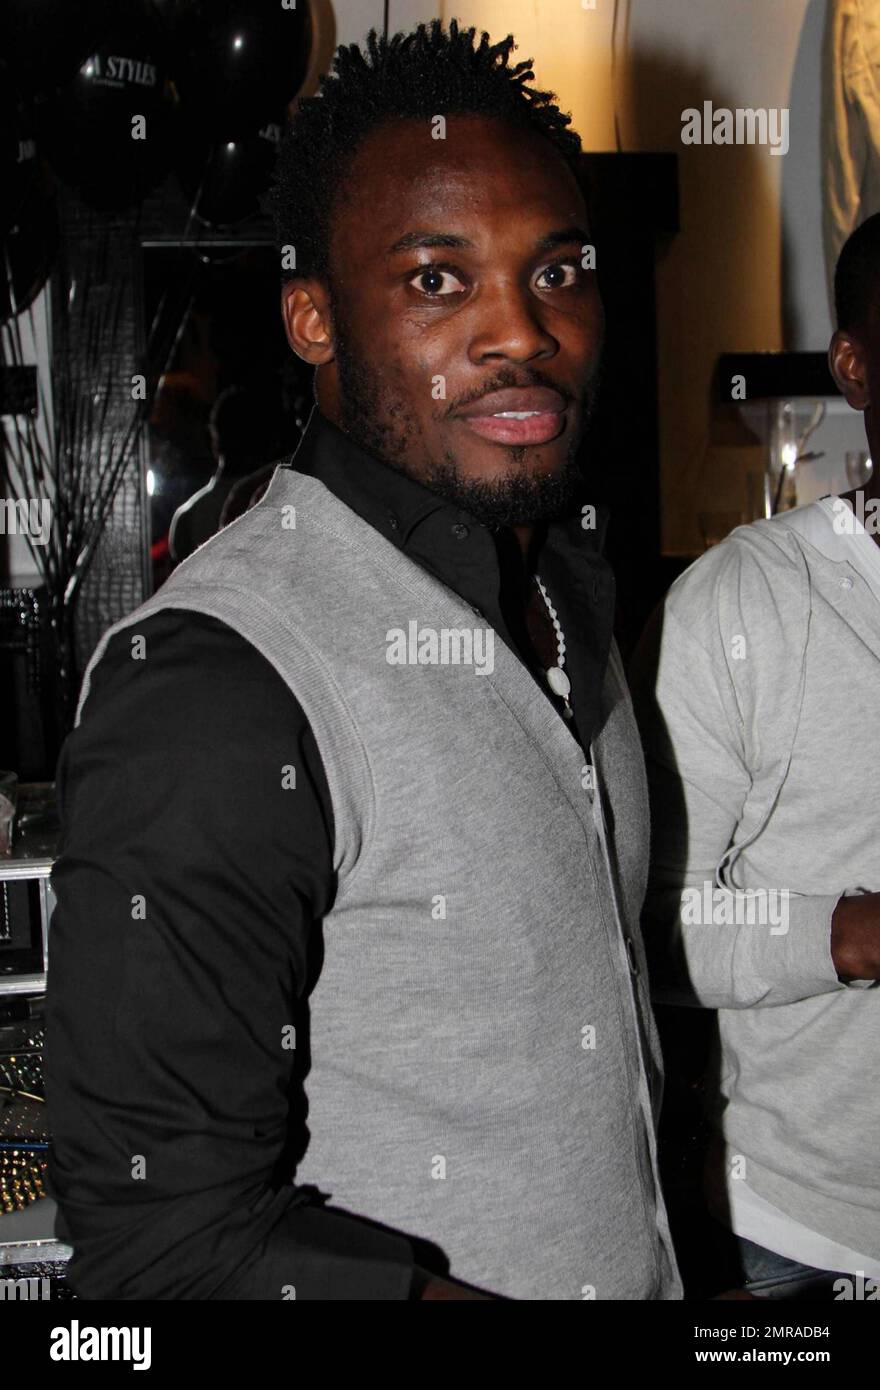 Footballer Michael Essien arrives to the Jada Styles launch party.  Jada Styles is a London-based image consulting, styling and personal online shopping hub for a select members-only group. London, UK. 05/04/10.    . Stock Photo